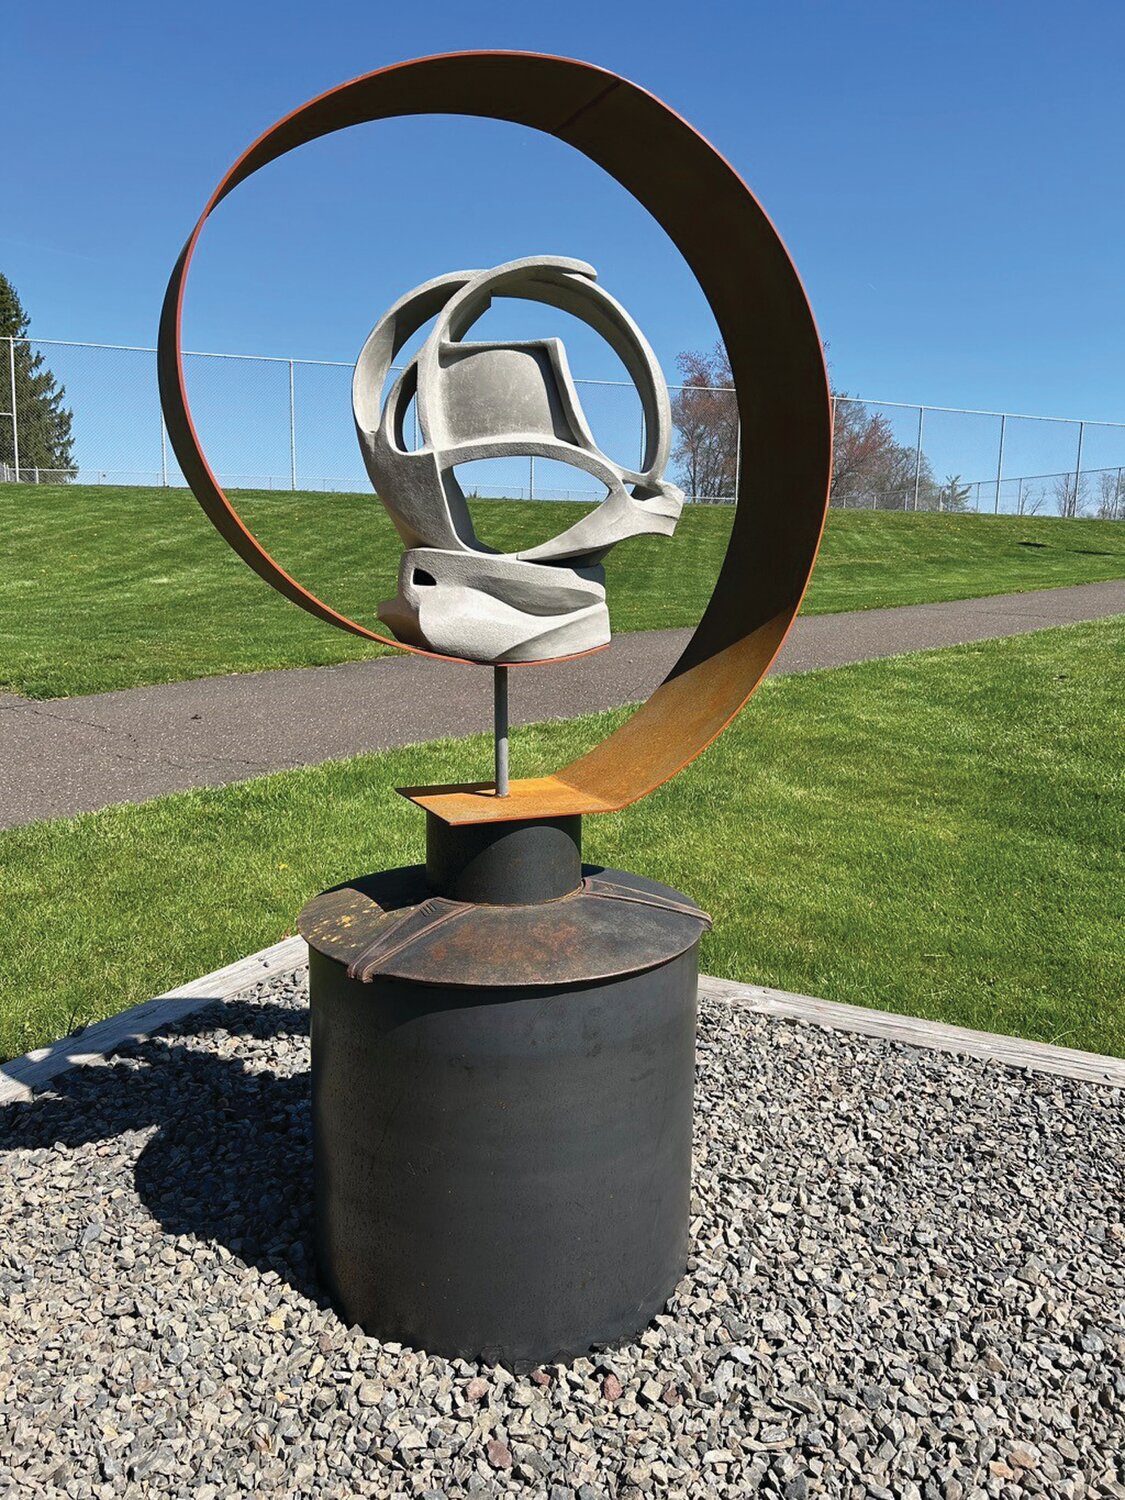 Wendy Liss’ “Evolve” has been added to the Sculpture Walk on the Newtown Campus of Bucks County Community College.